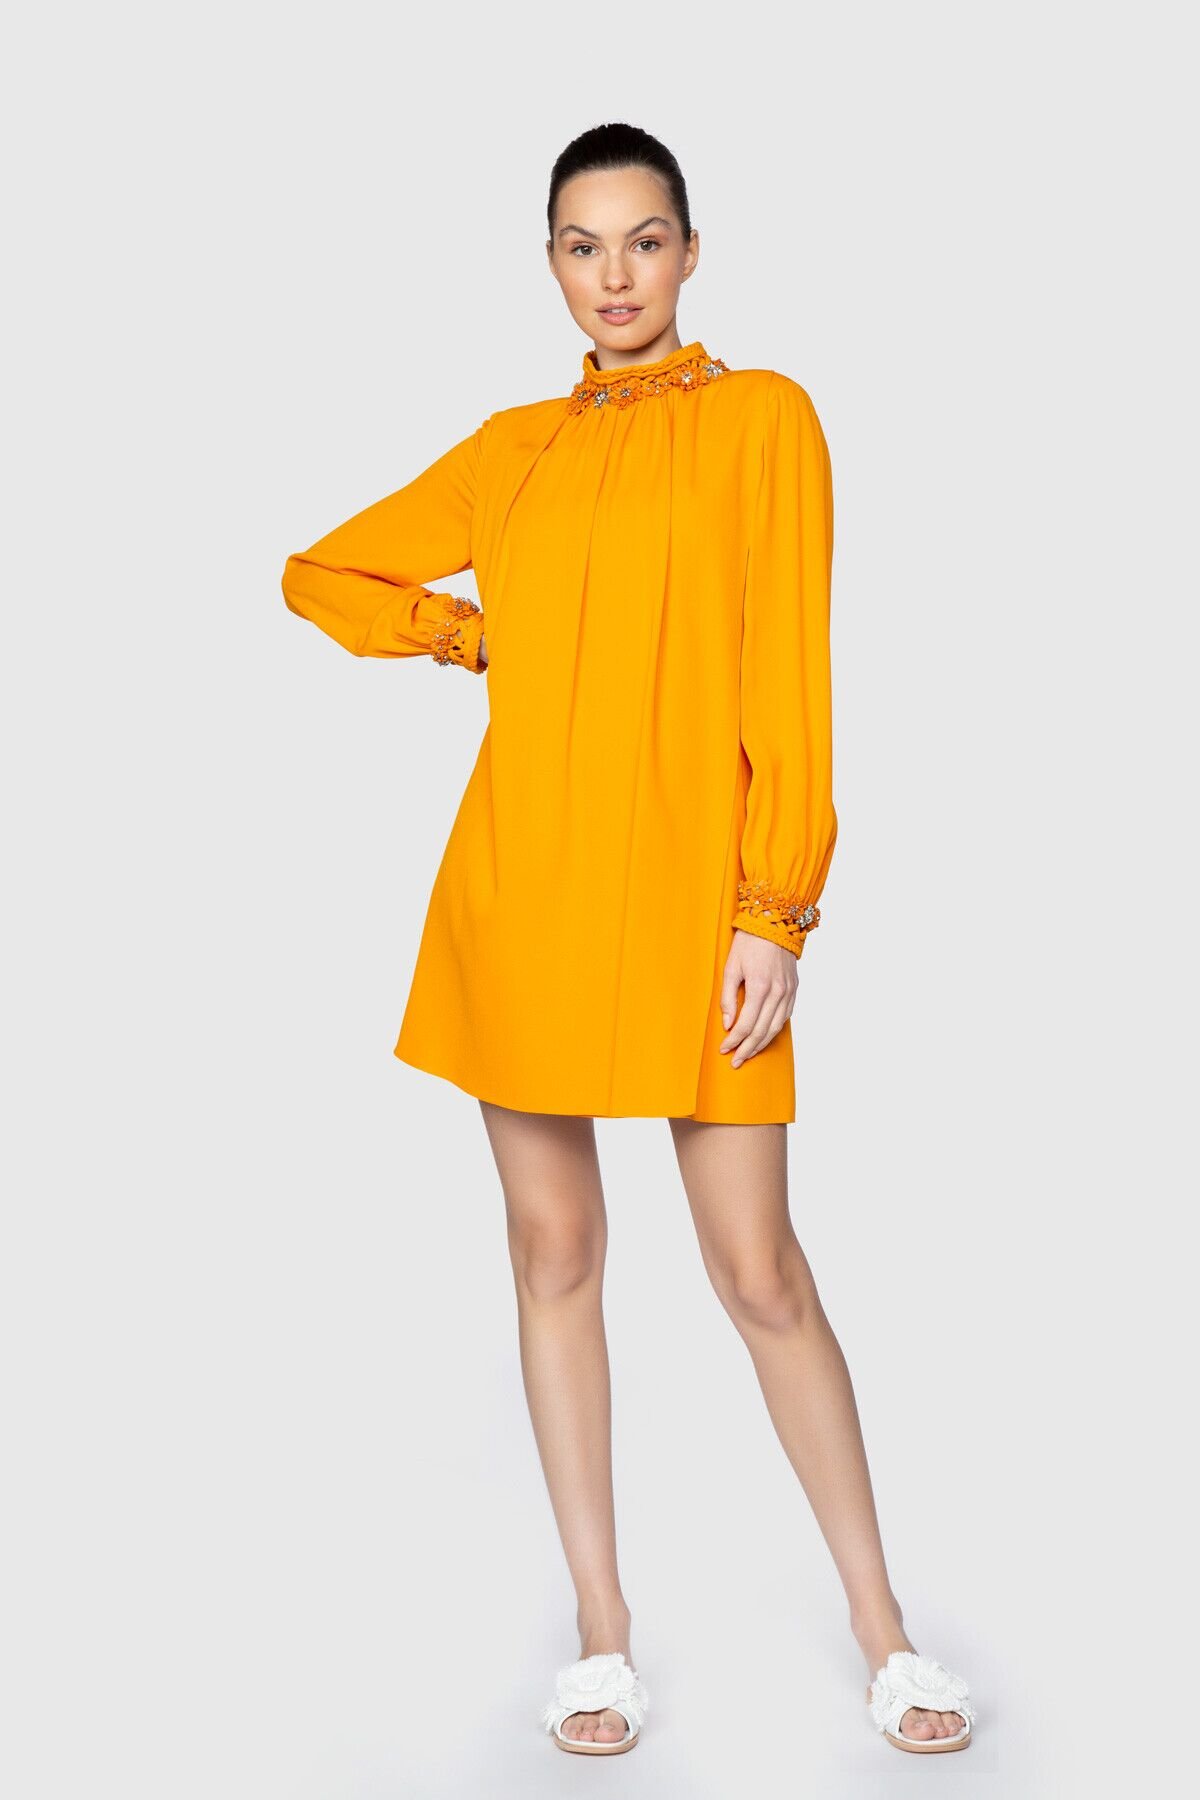 Embroidered Collar Mini Yellow Party Dress